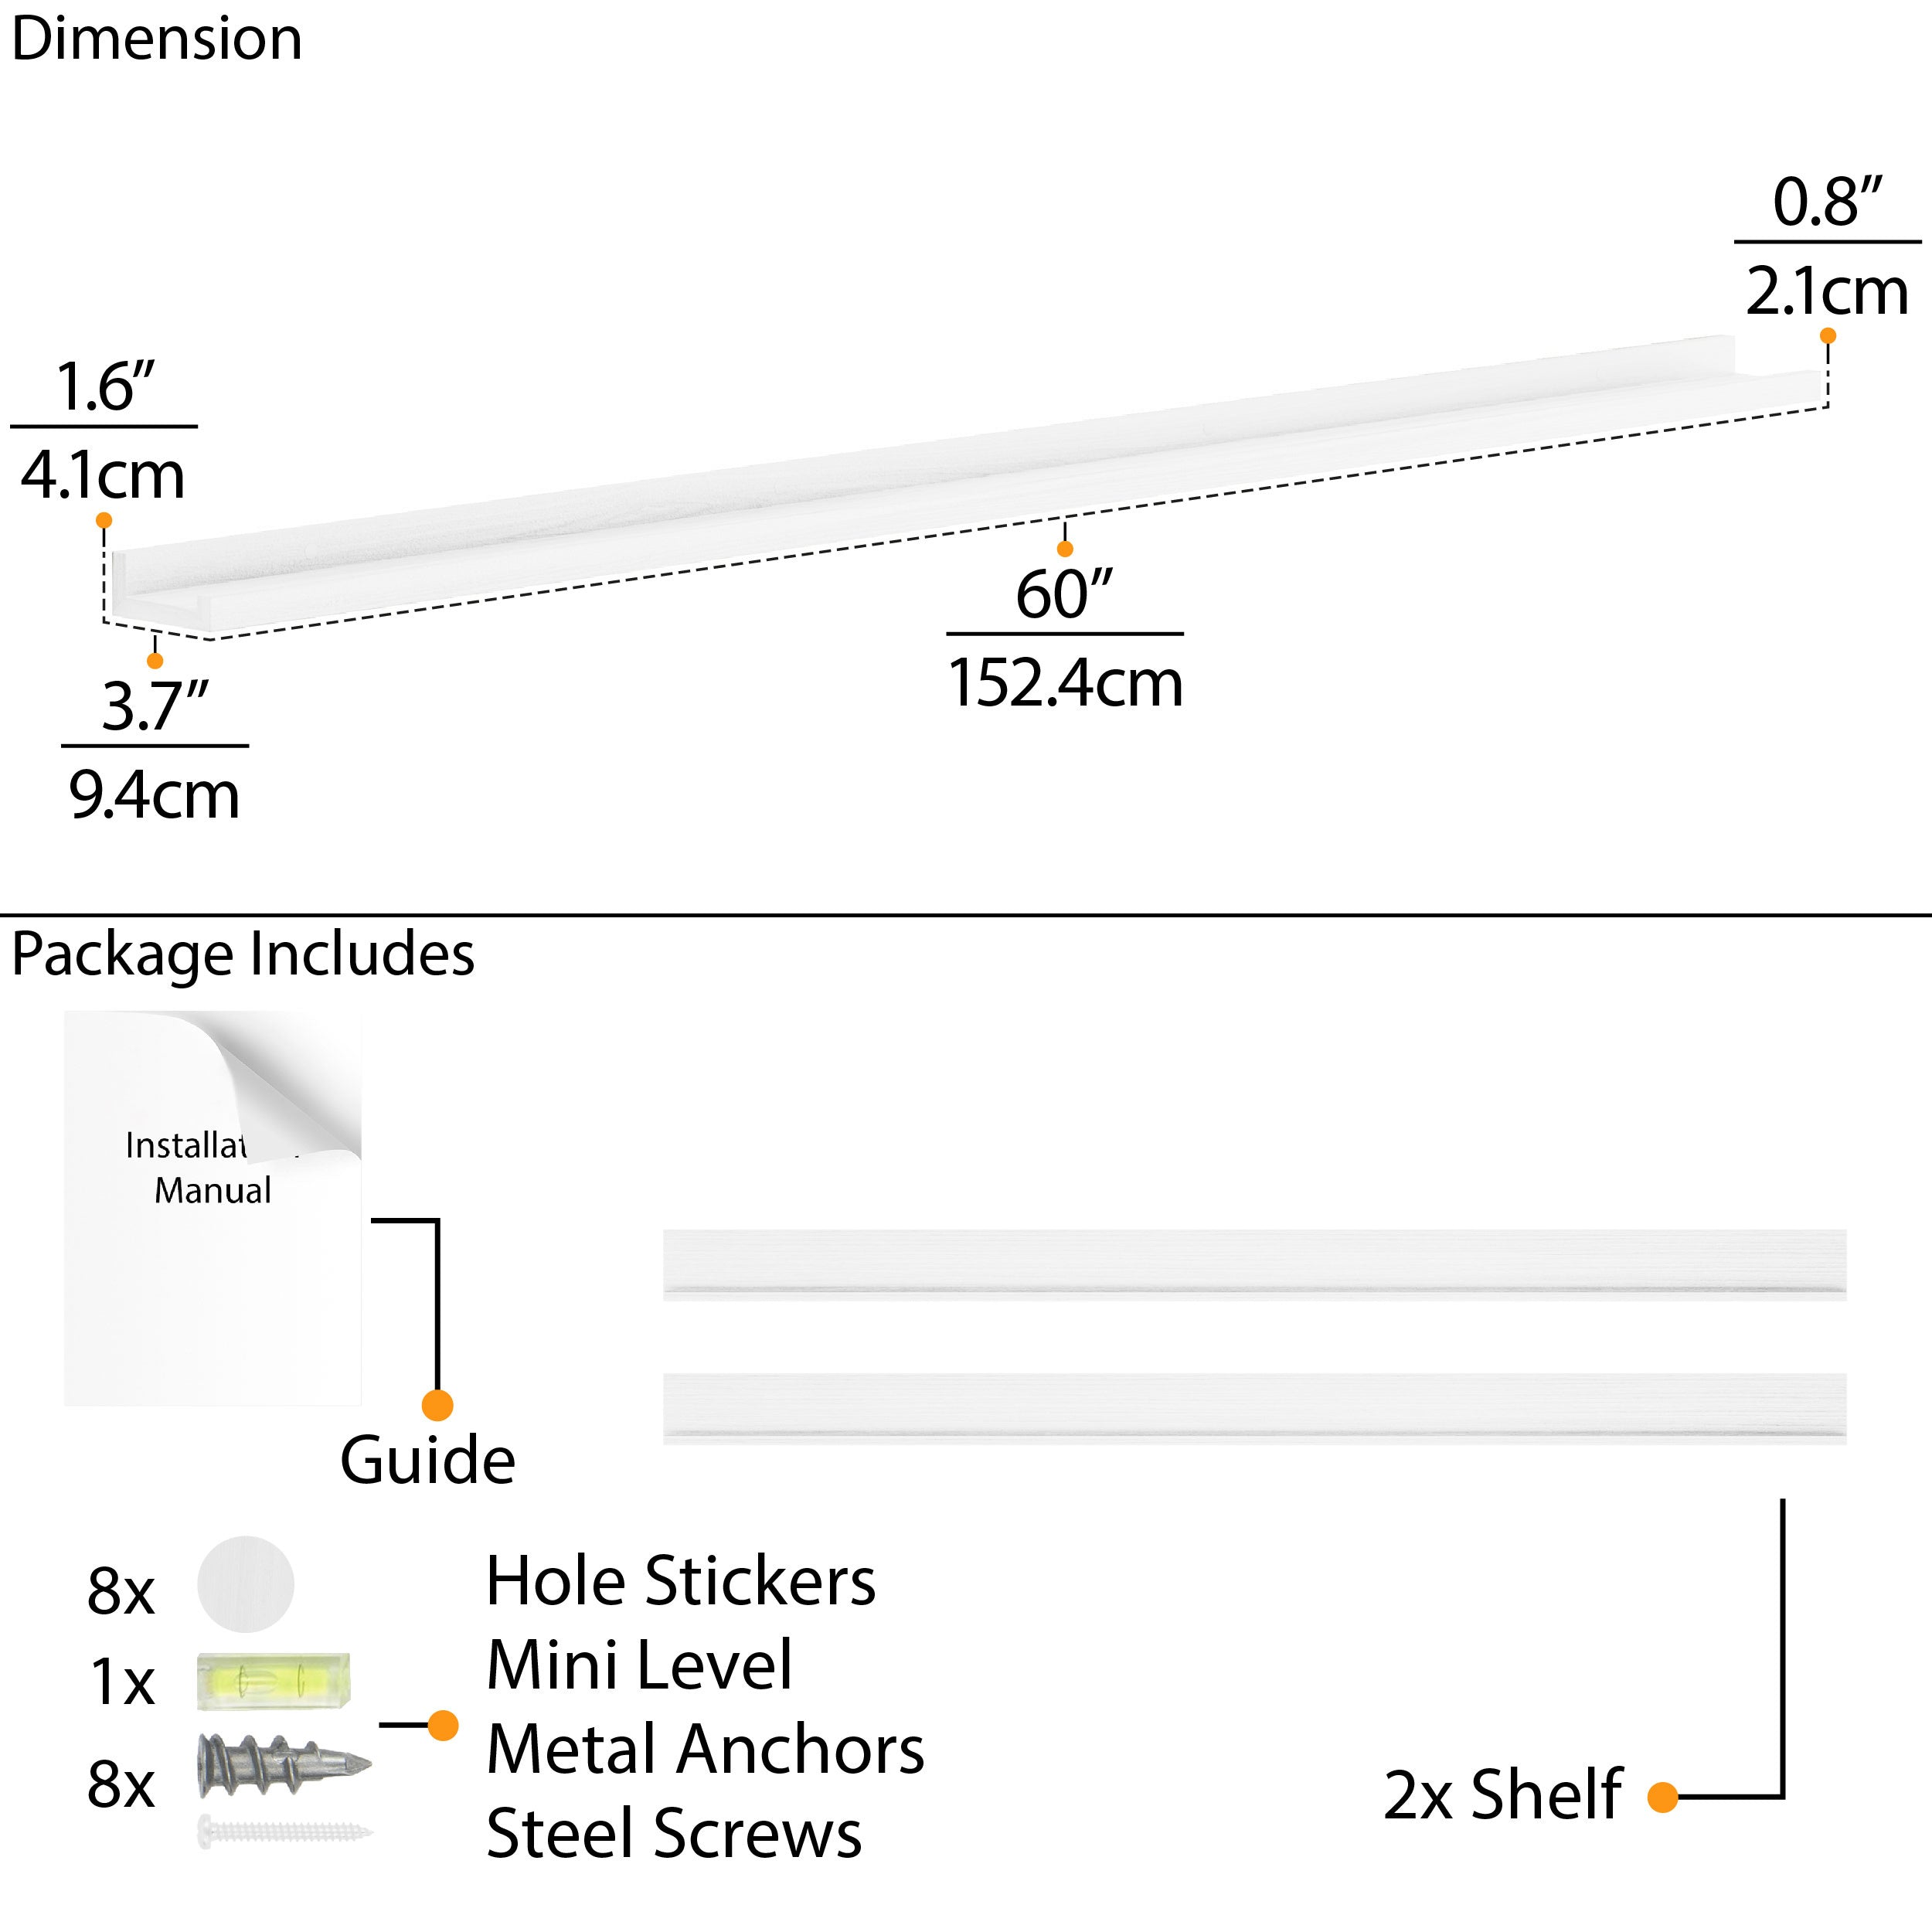 Technical specifications of a 60" wall shelf white, including dimensions and installation materials.